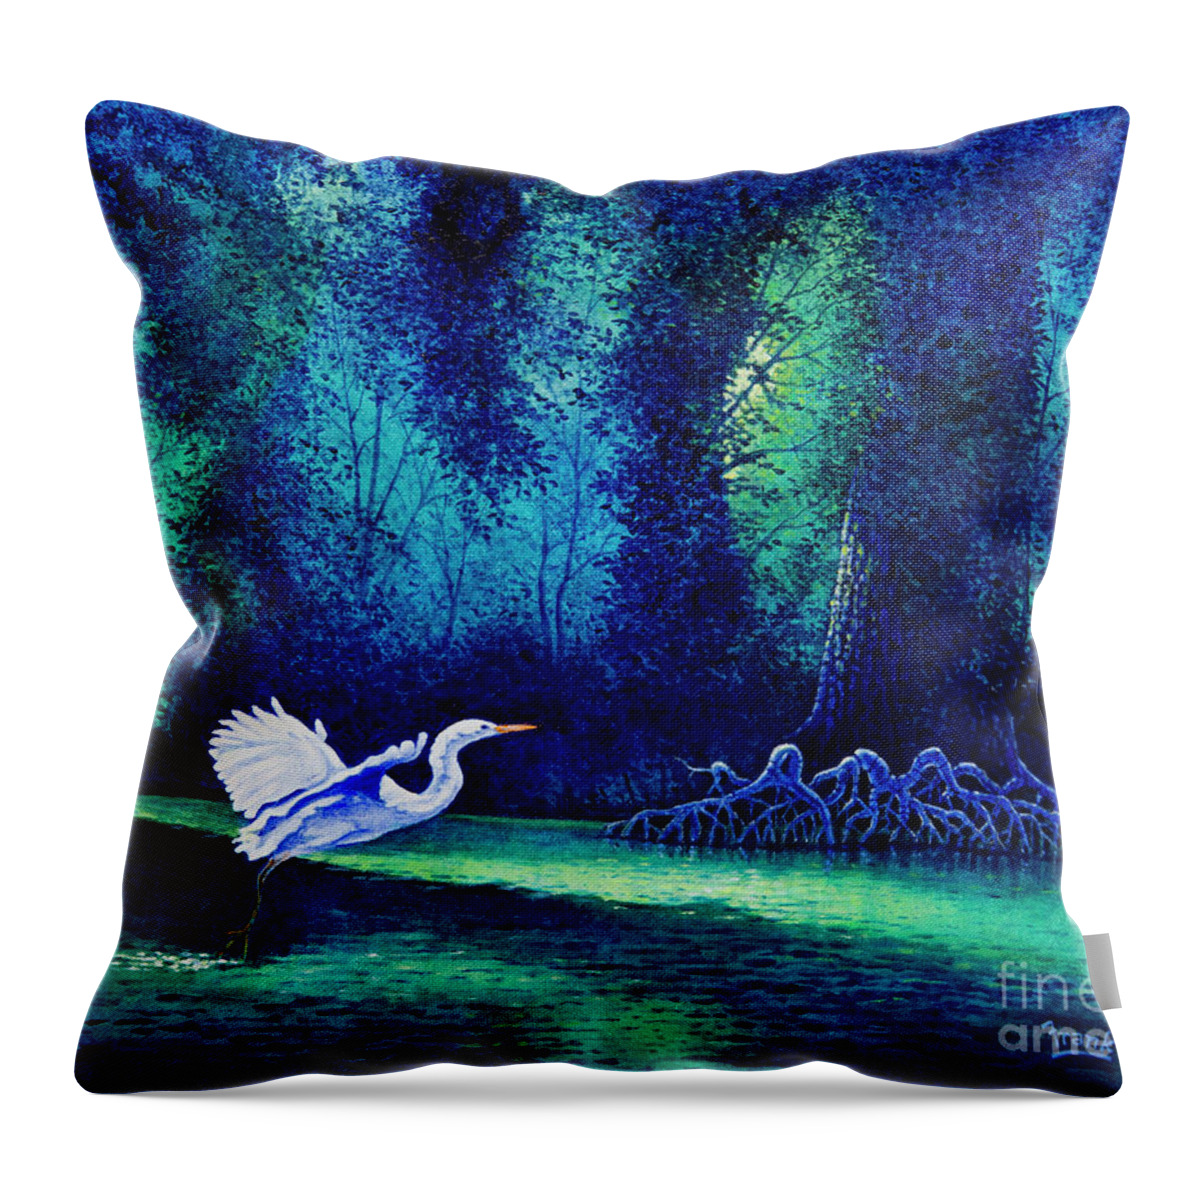 Egret Throw Pillow featuring the painting Swamp Scene by Michael Frank